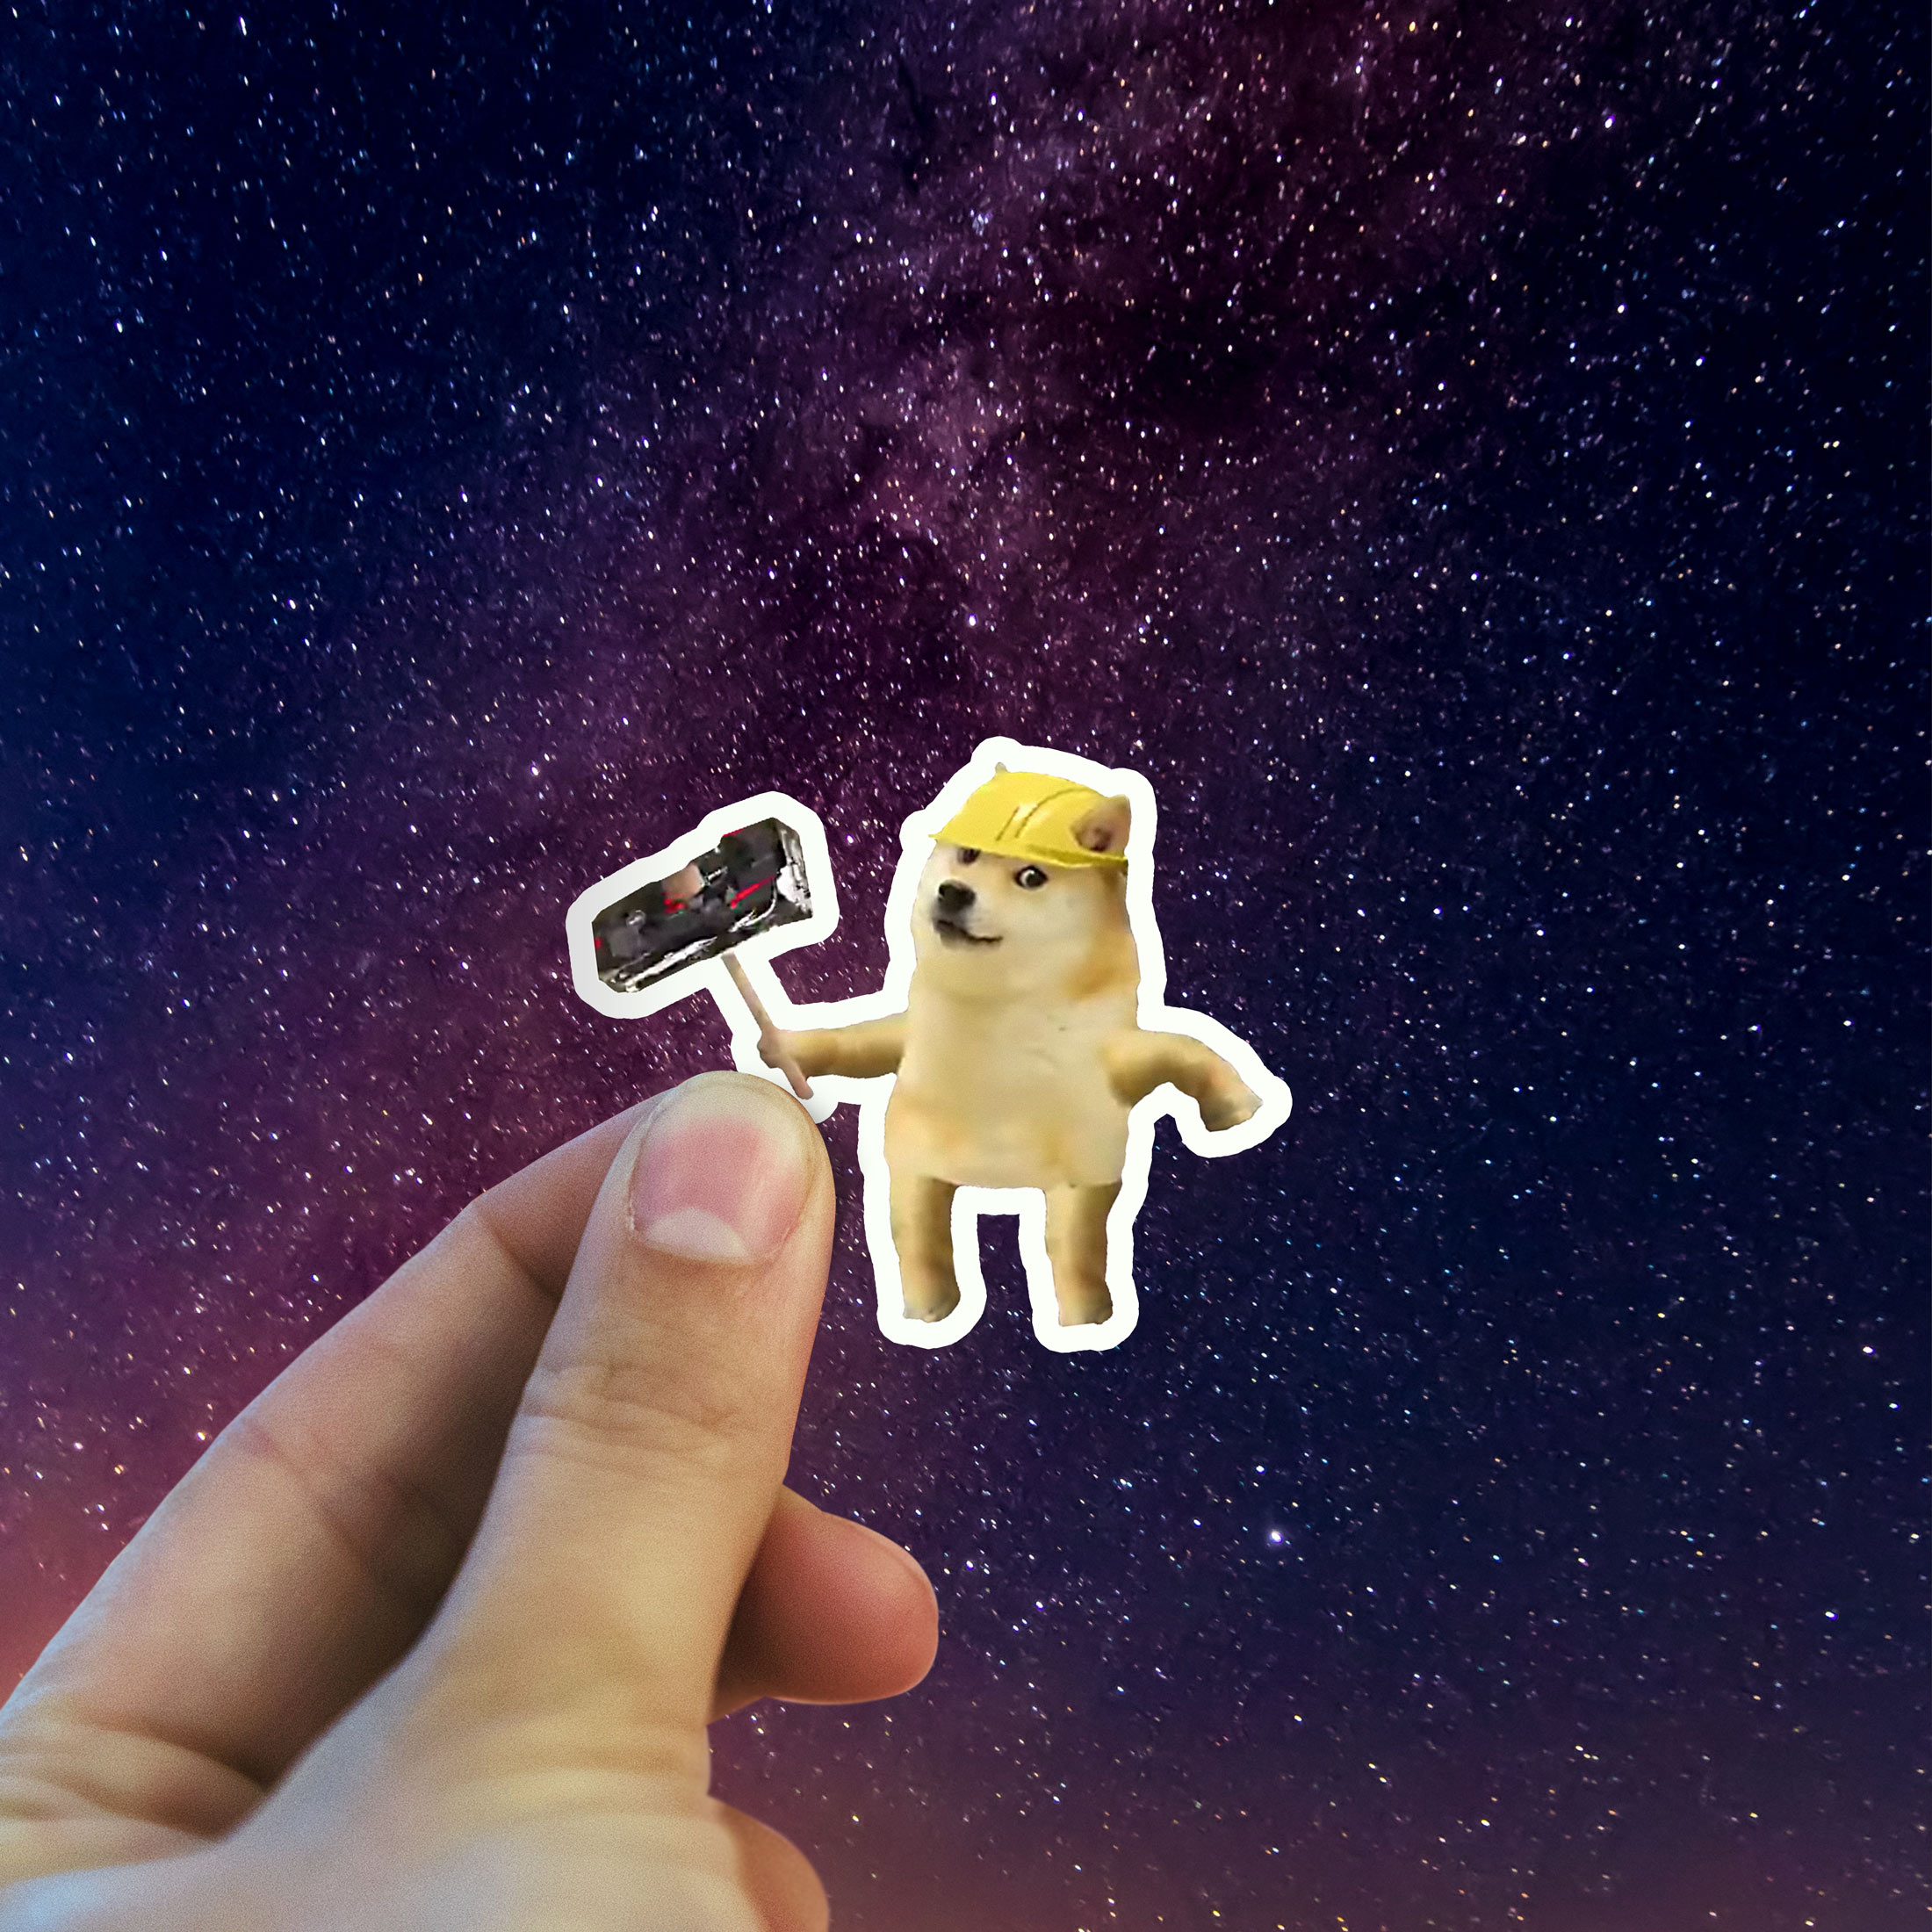 Dogecoin mining sticker holding in hand doge miner stickers